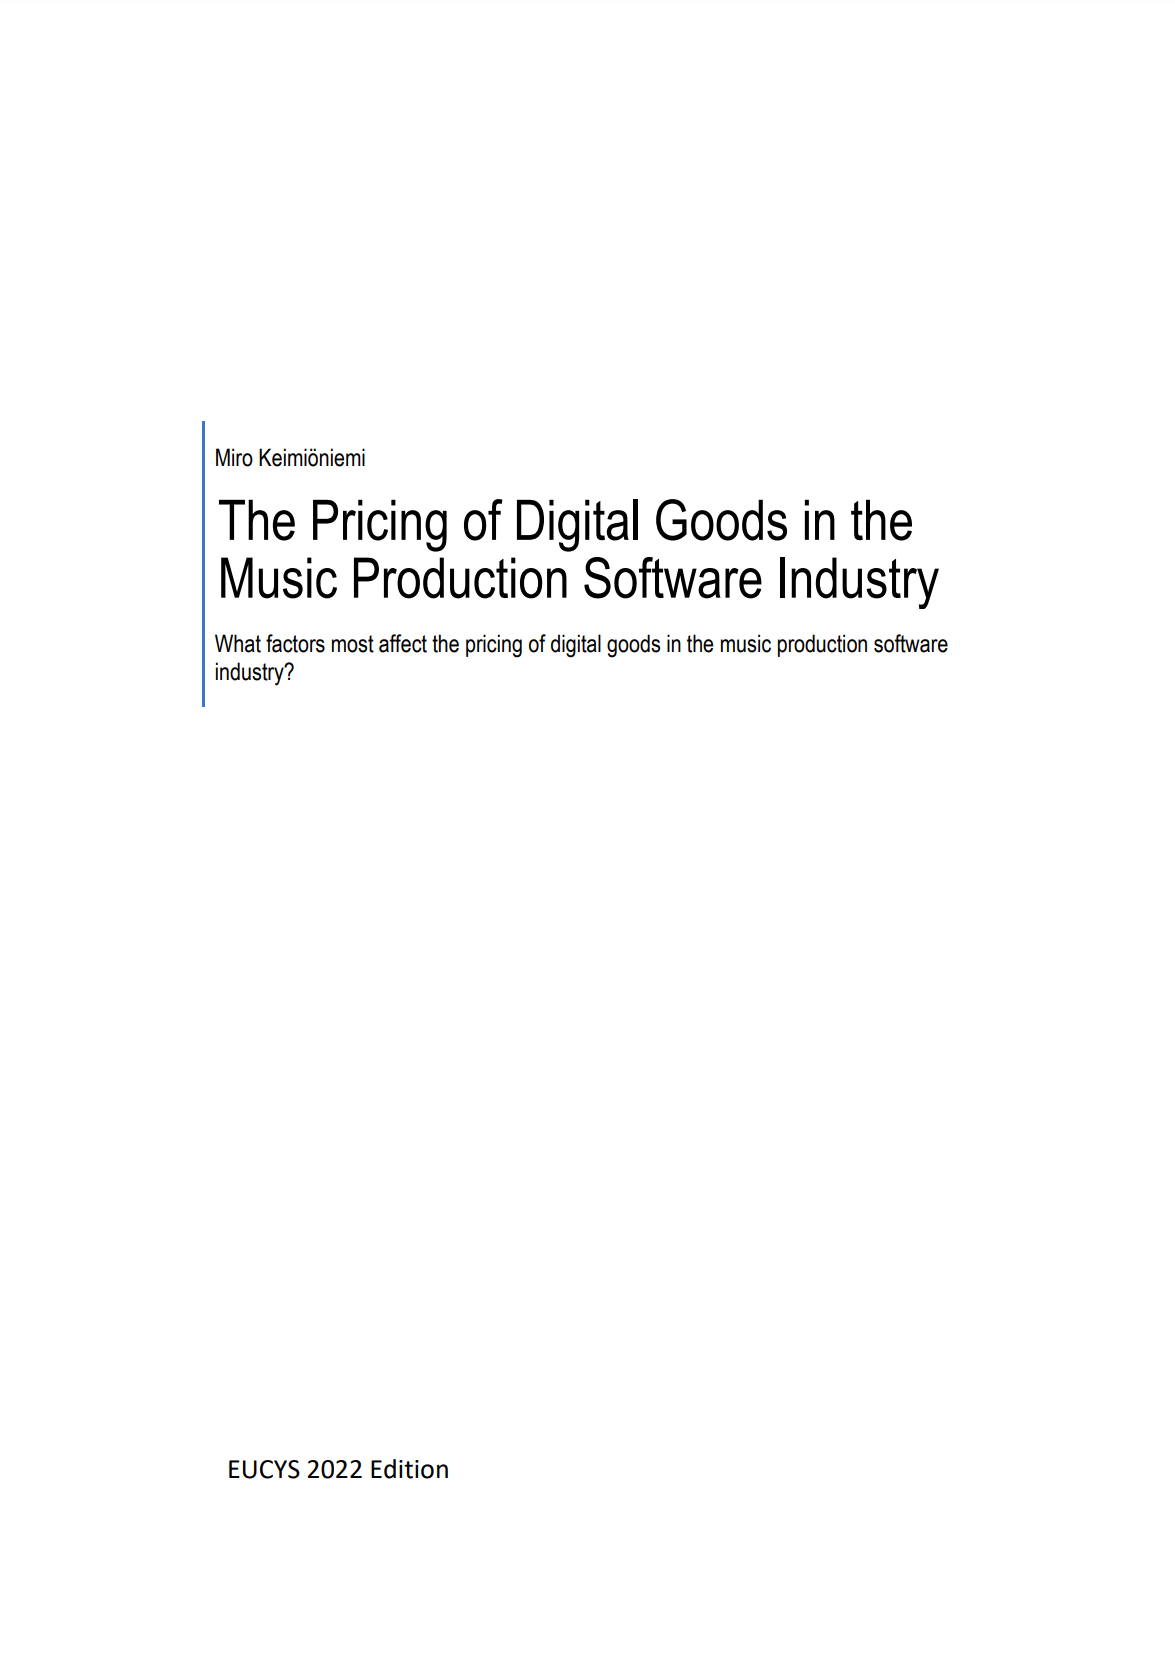 The Pricing of Digital Goods in the Music Production Software Industry - Report for EUCYS document